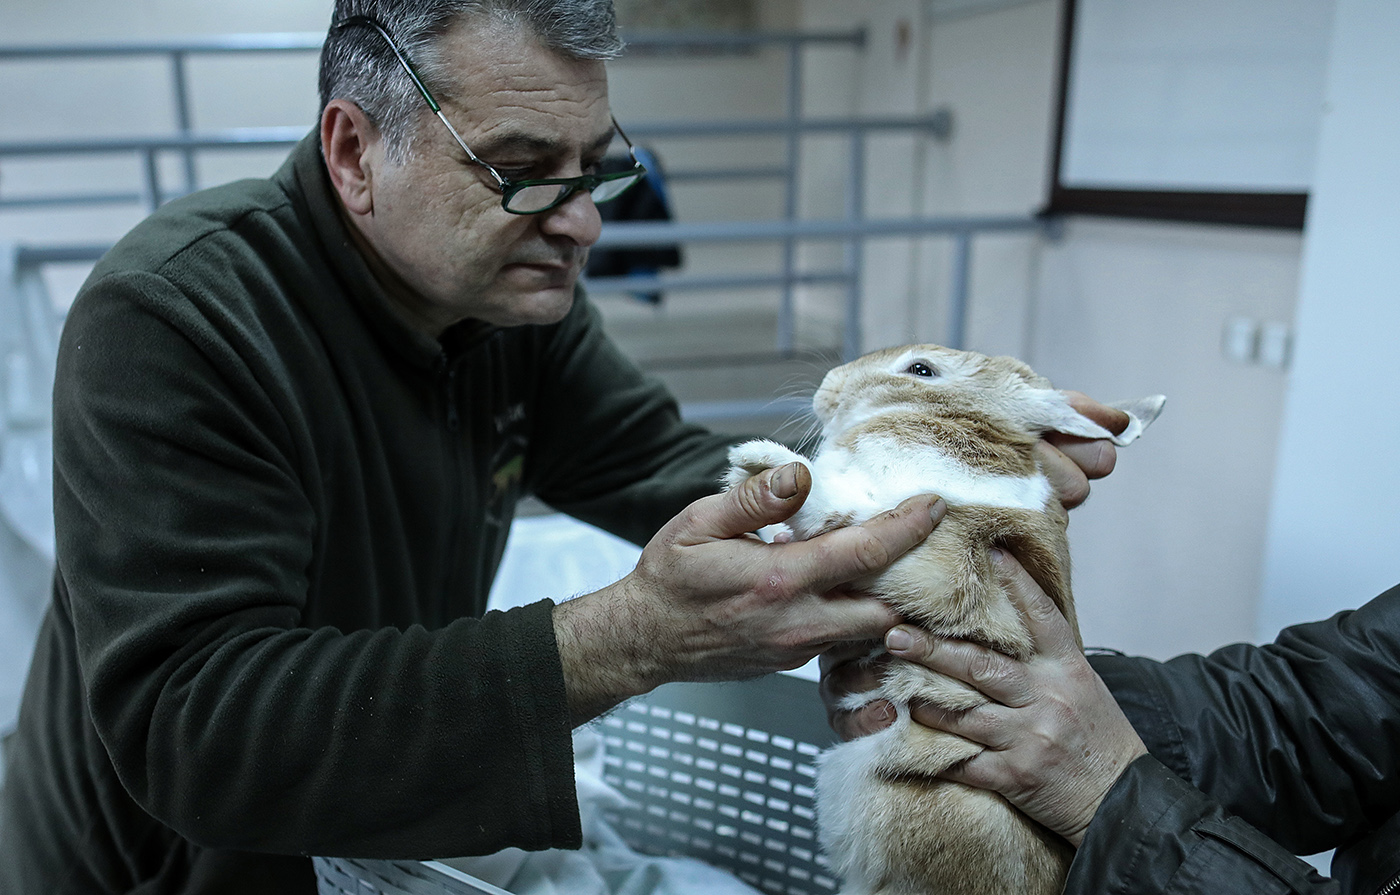 Head of Department of Wild Animal Diseases and Ecology Prof. Dr. Serhat Ozsoy checks a rabbit in the Istanbul University Cerrahpasa Faculty of Veterinary Science Hospital in Istanbul, Turkey, 13 December 2018. 